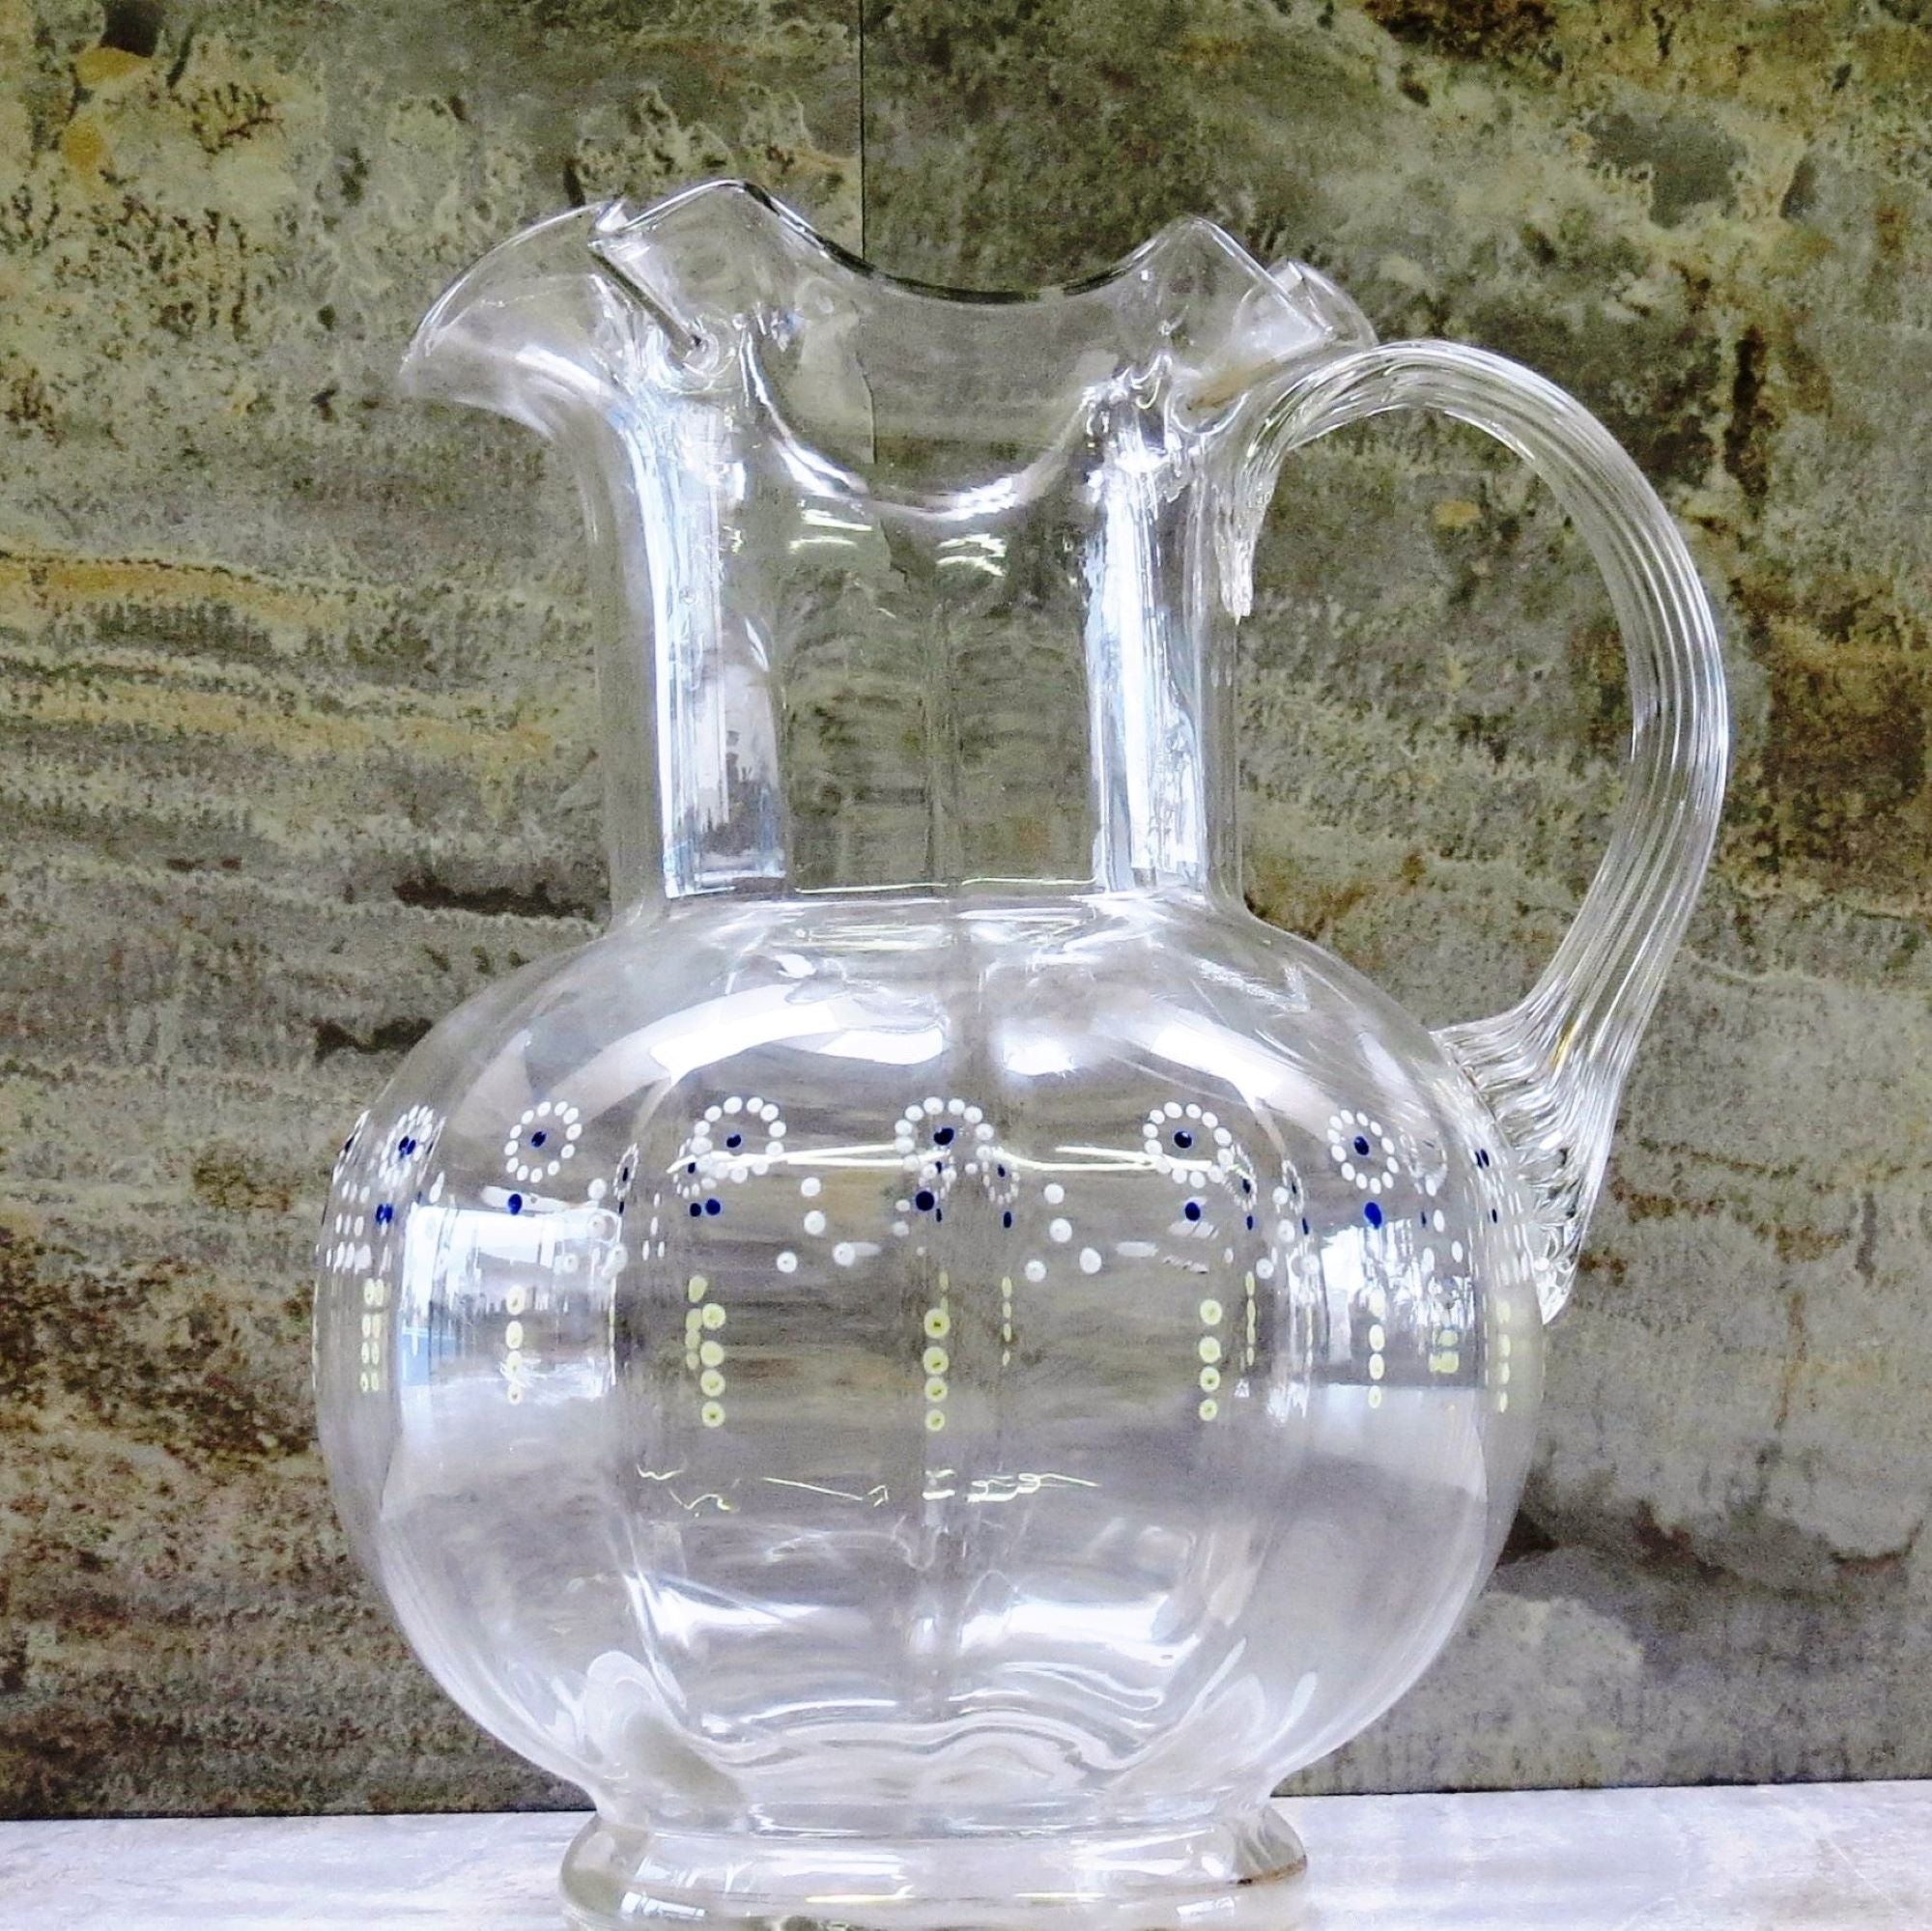 Vintage French Rolled Glass Pitcher - Fireside Antiques